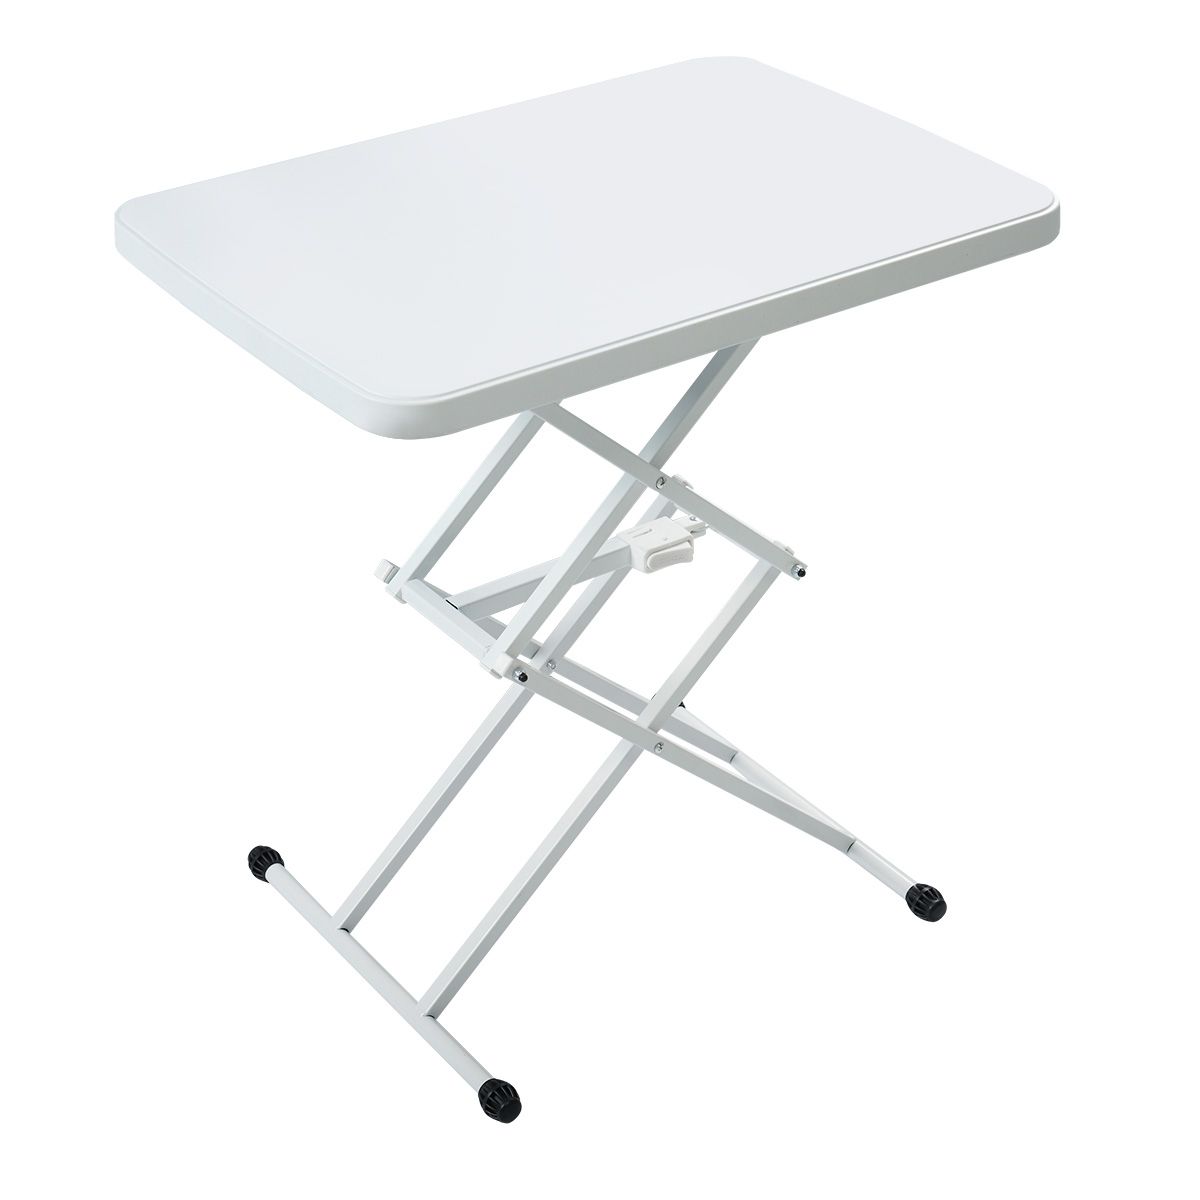 Sandinrayli Height Adjustable Plastic Folding Table Lifting Card Table For Famous White Wood Adjustable Reading Tables (View 8 of 15)